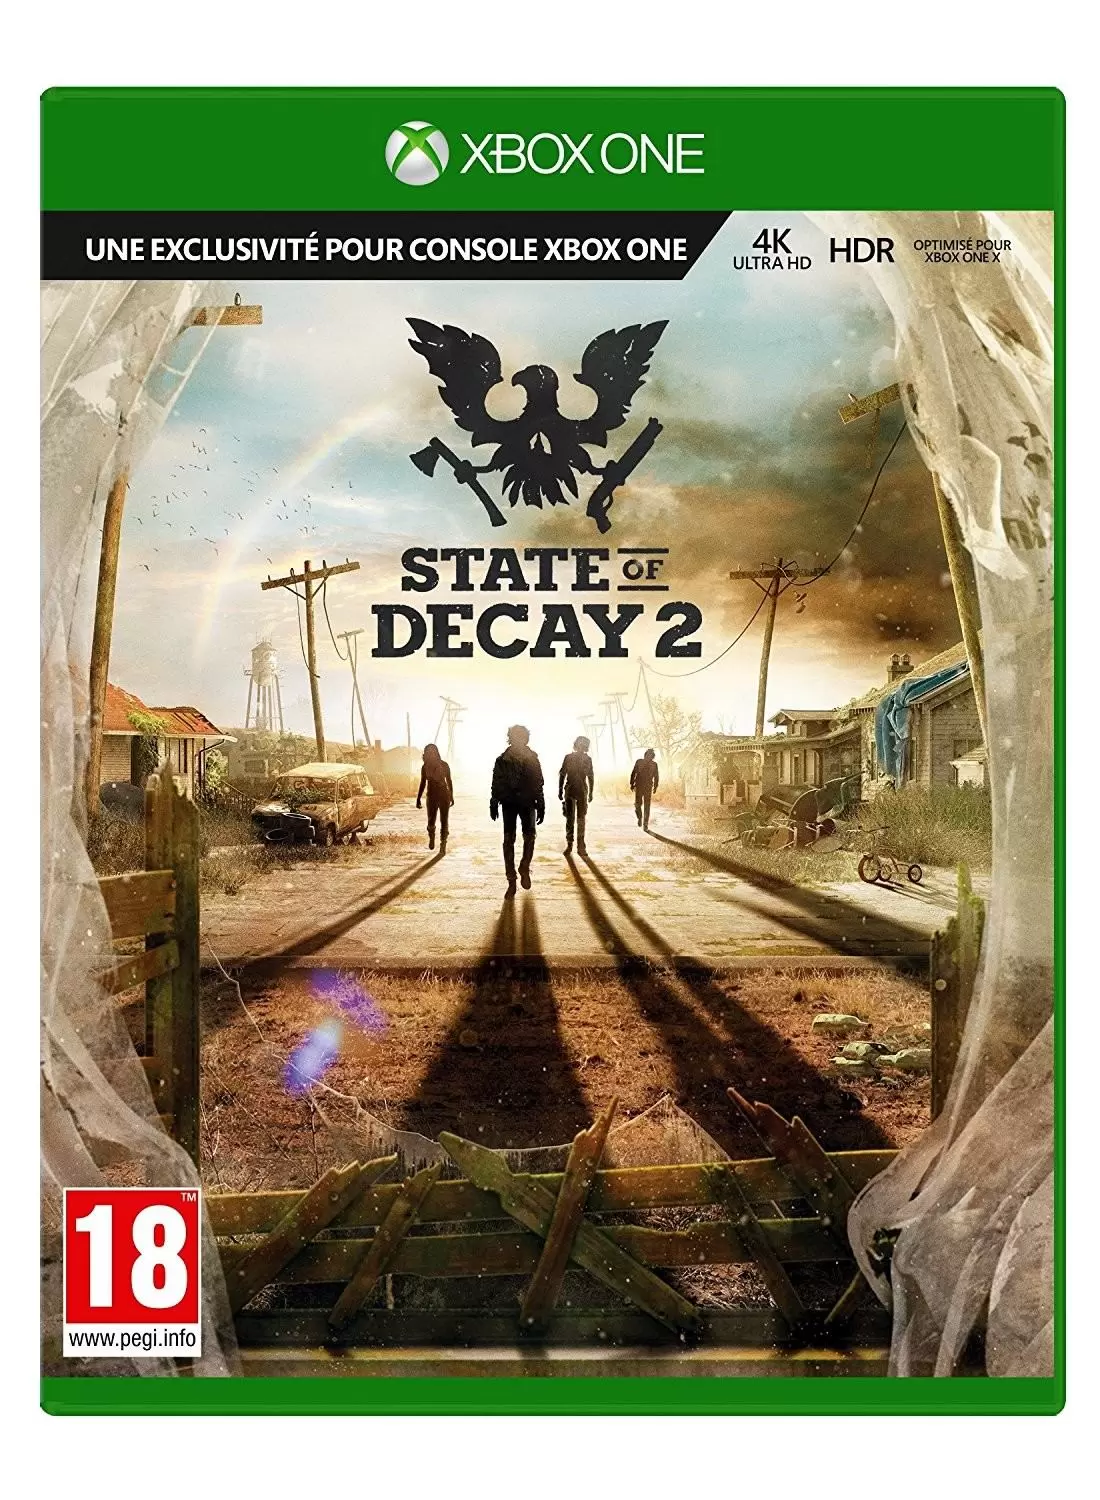 Jeux XBOX One - State of Decay 2